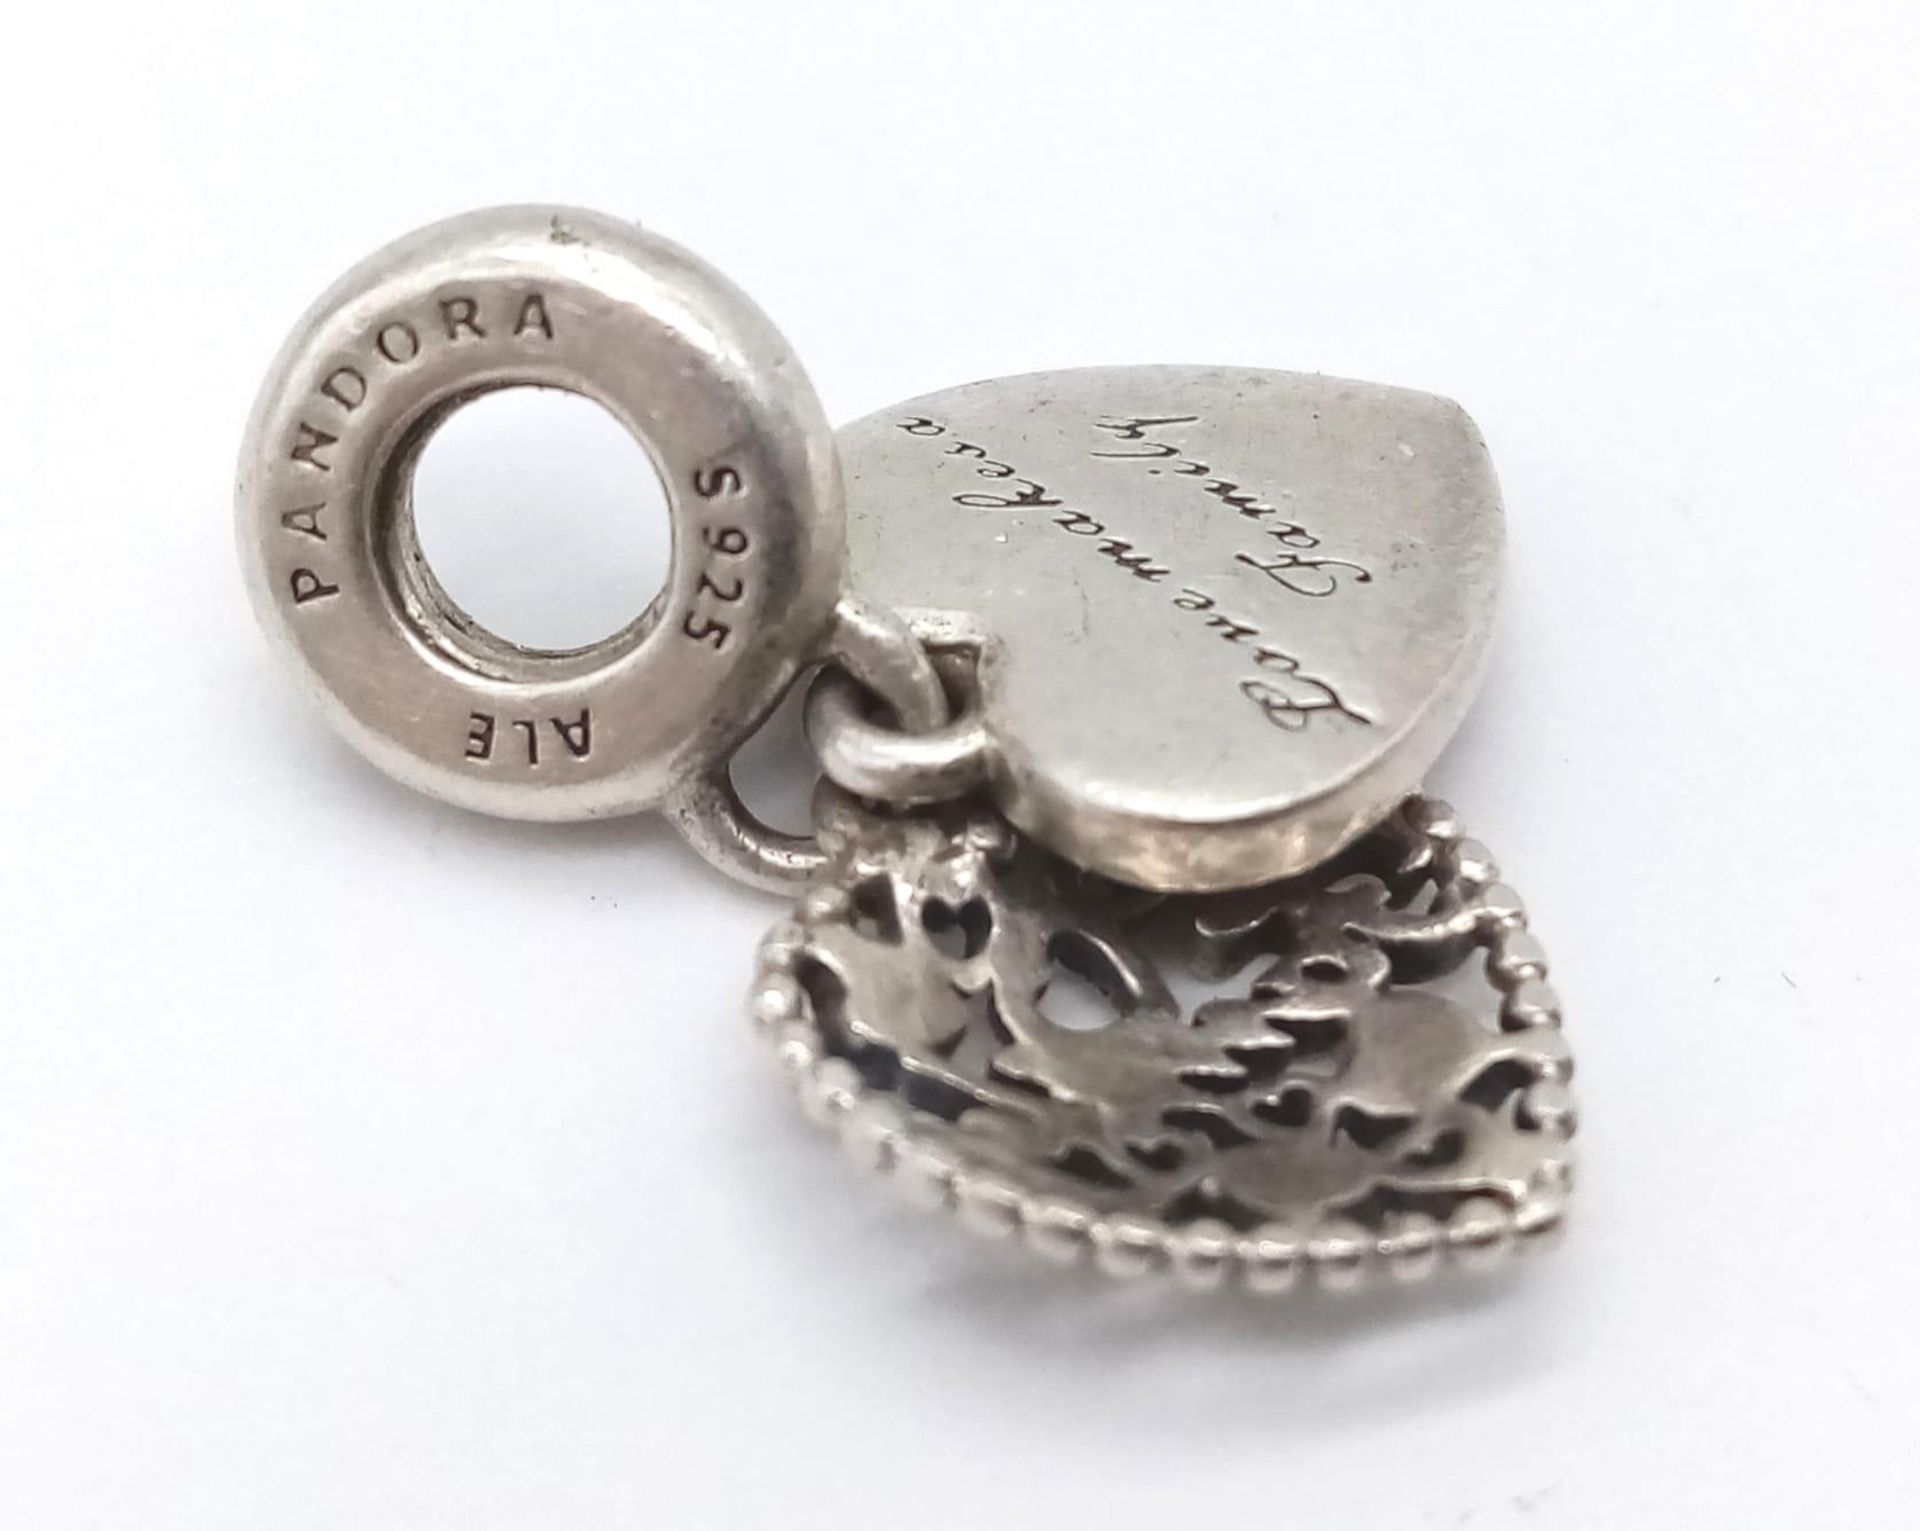 2 x Pandora Sterling Silver Heart Charms - one says 'Family' and the other says 'First My Mother, - Image 12 of 13